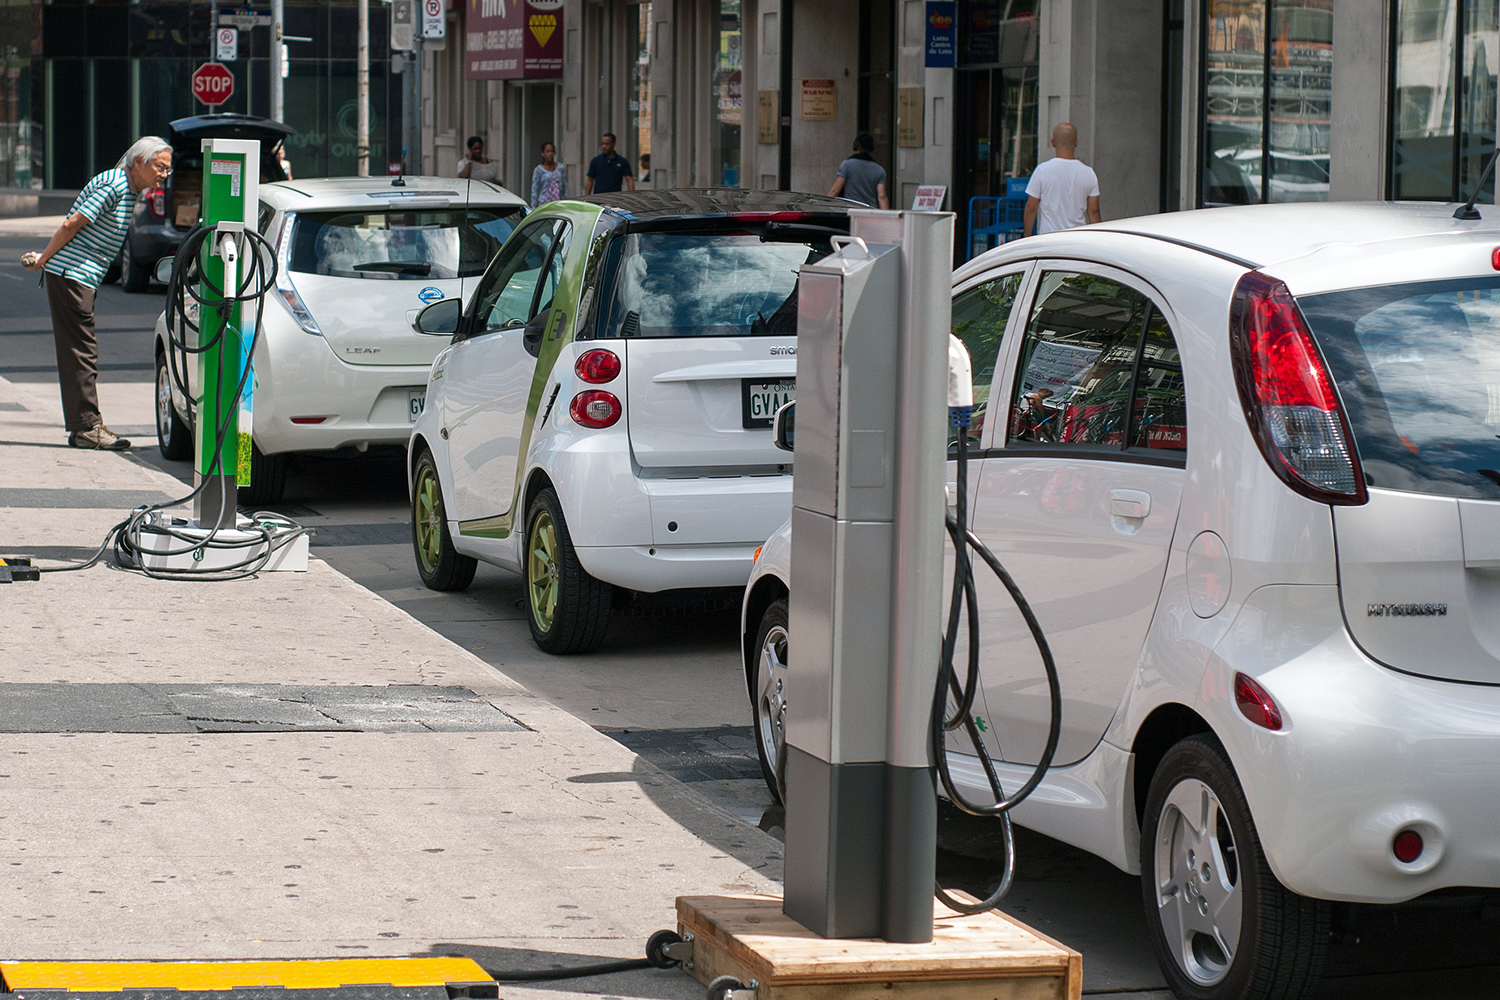 [PRESS RELEASE] BUDGET FUNDING A CHANCE TO SUPERCHARGE  EV PICK-UP